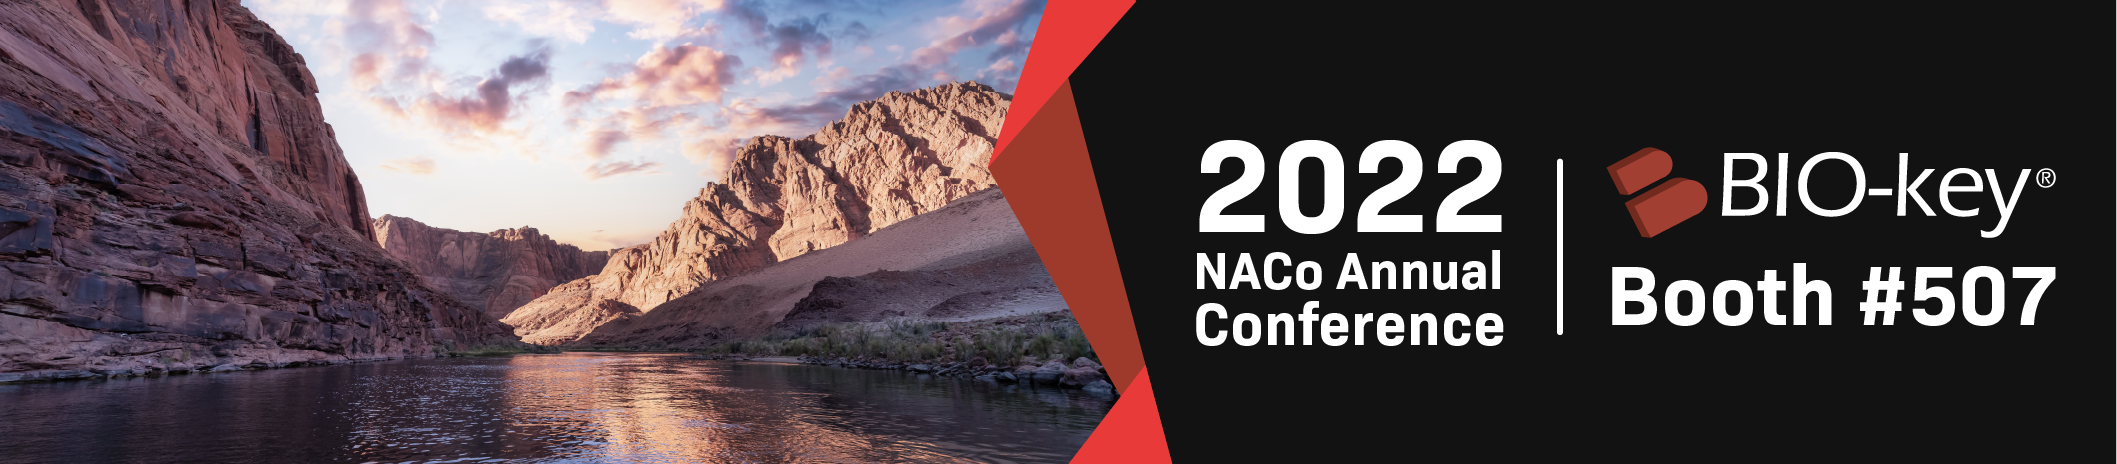 2022 NACo Annual Conference @ Booth #507